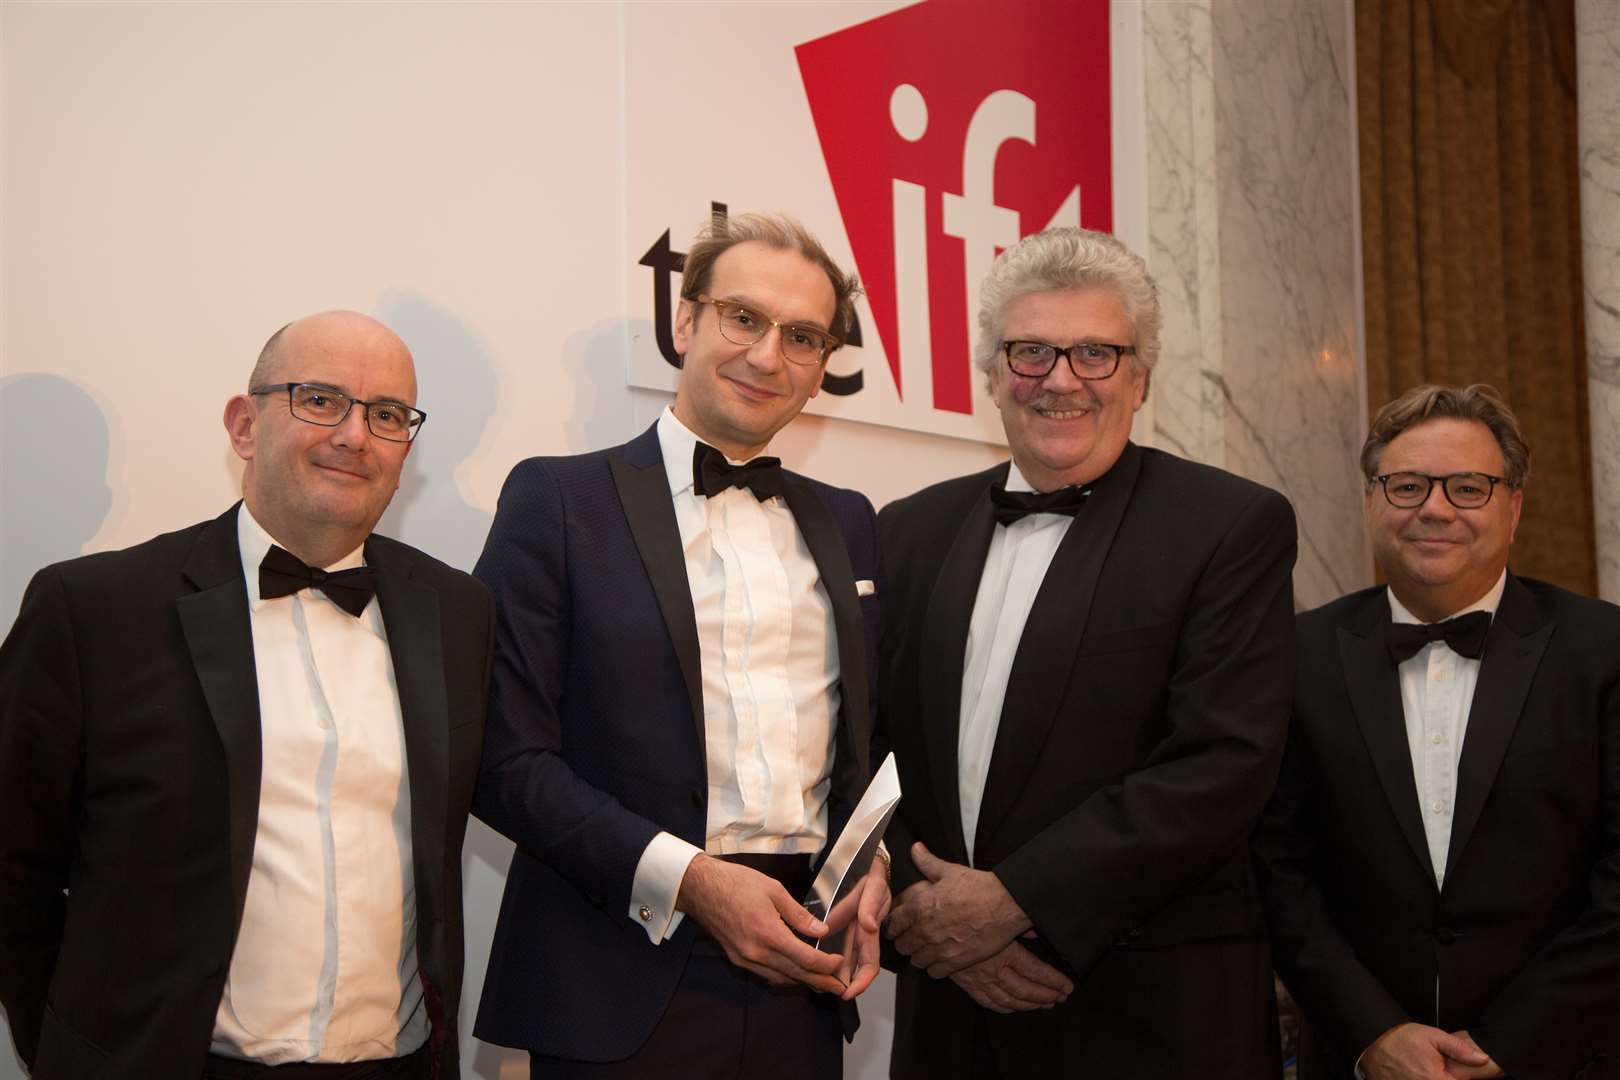 With the award, from left, Adam Loviett of Insolvency Risk Services, Mark Lumsdon-Taylor of the Hadlow Group, Mark Dance of Kent County Council and Graham Rusling from The Institute of Fiscal Turnaround